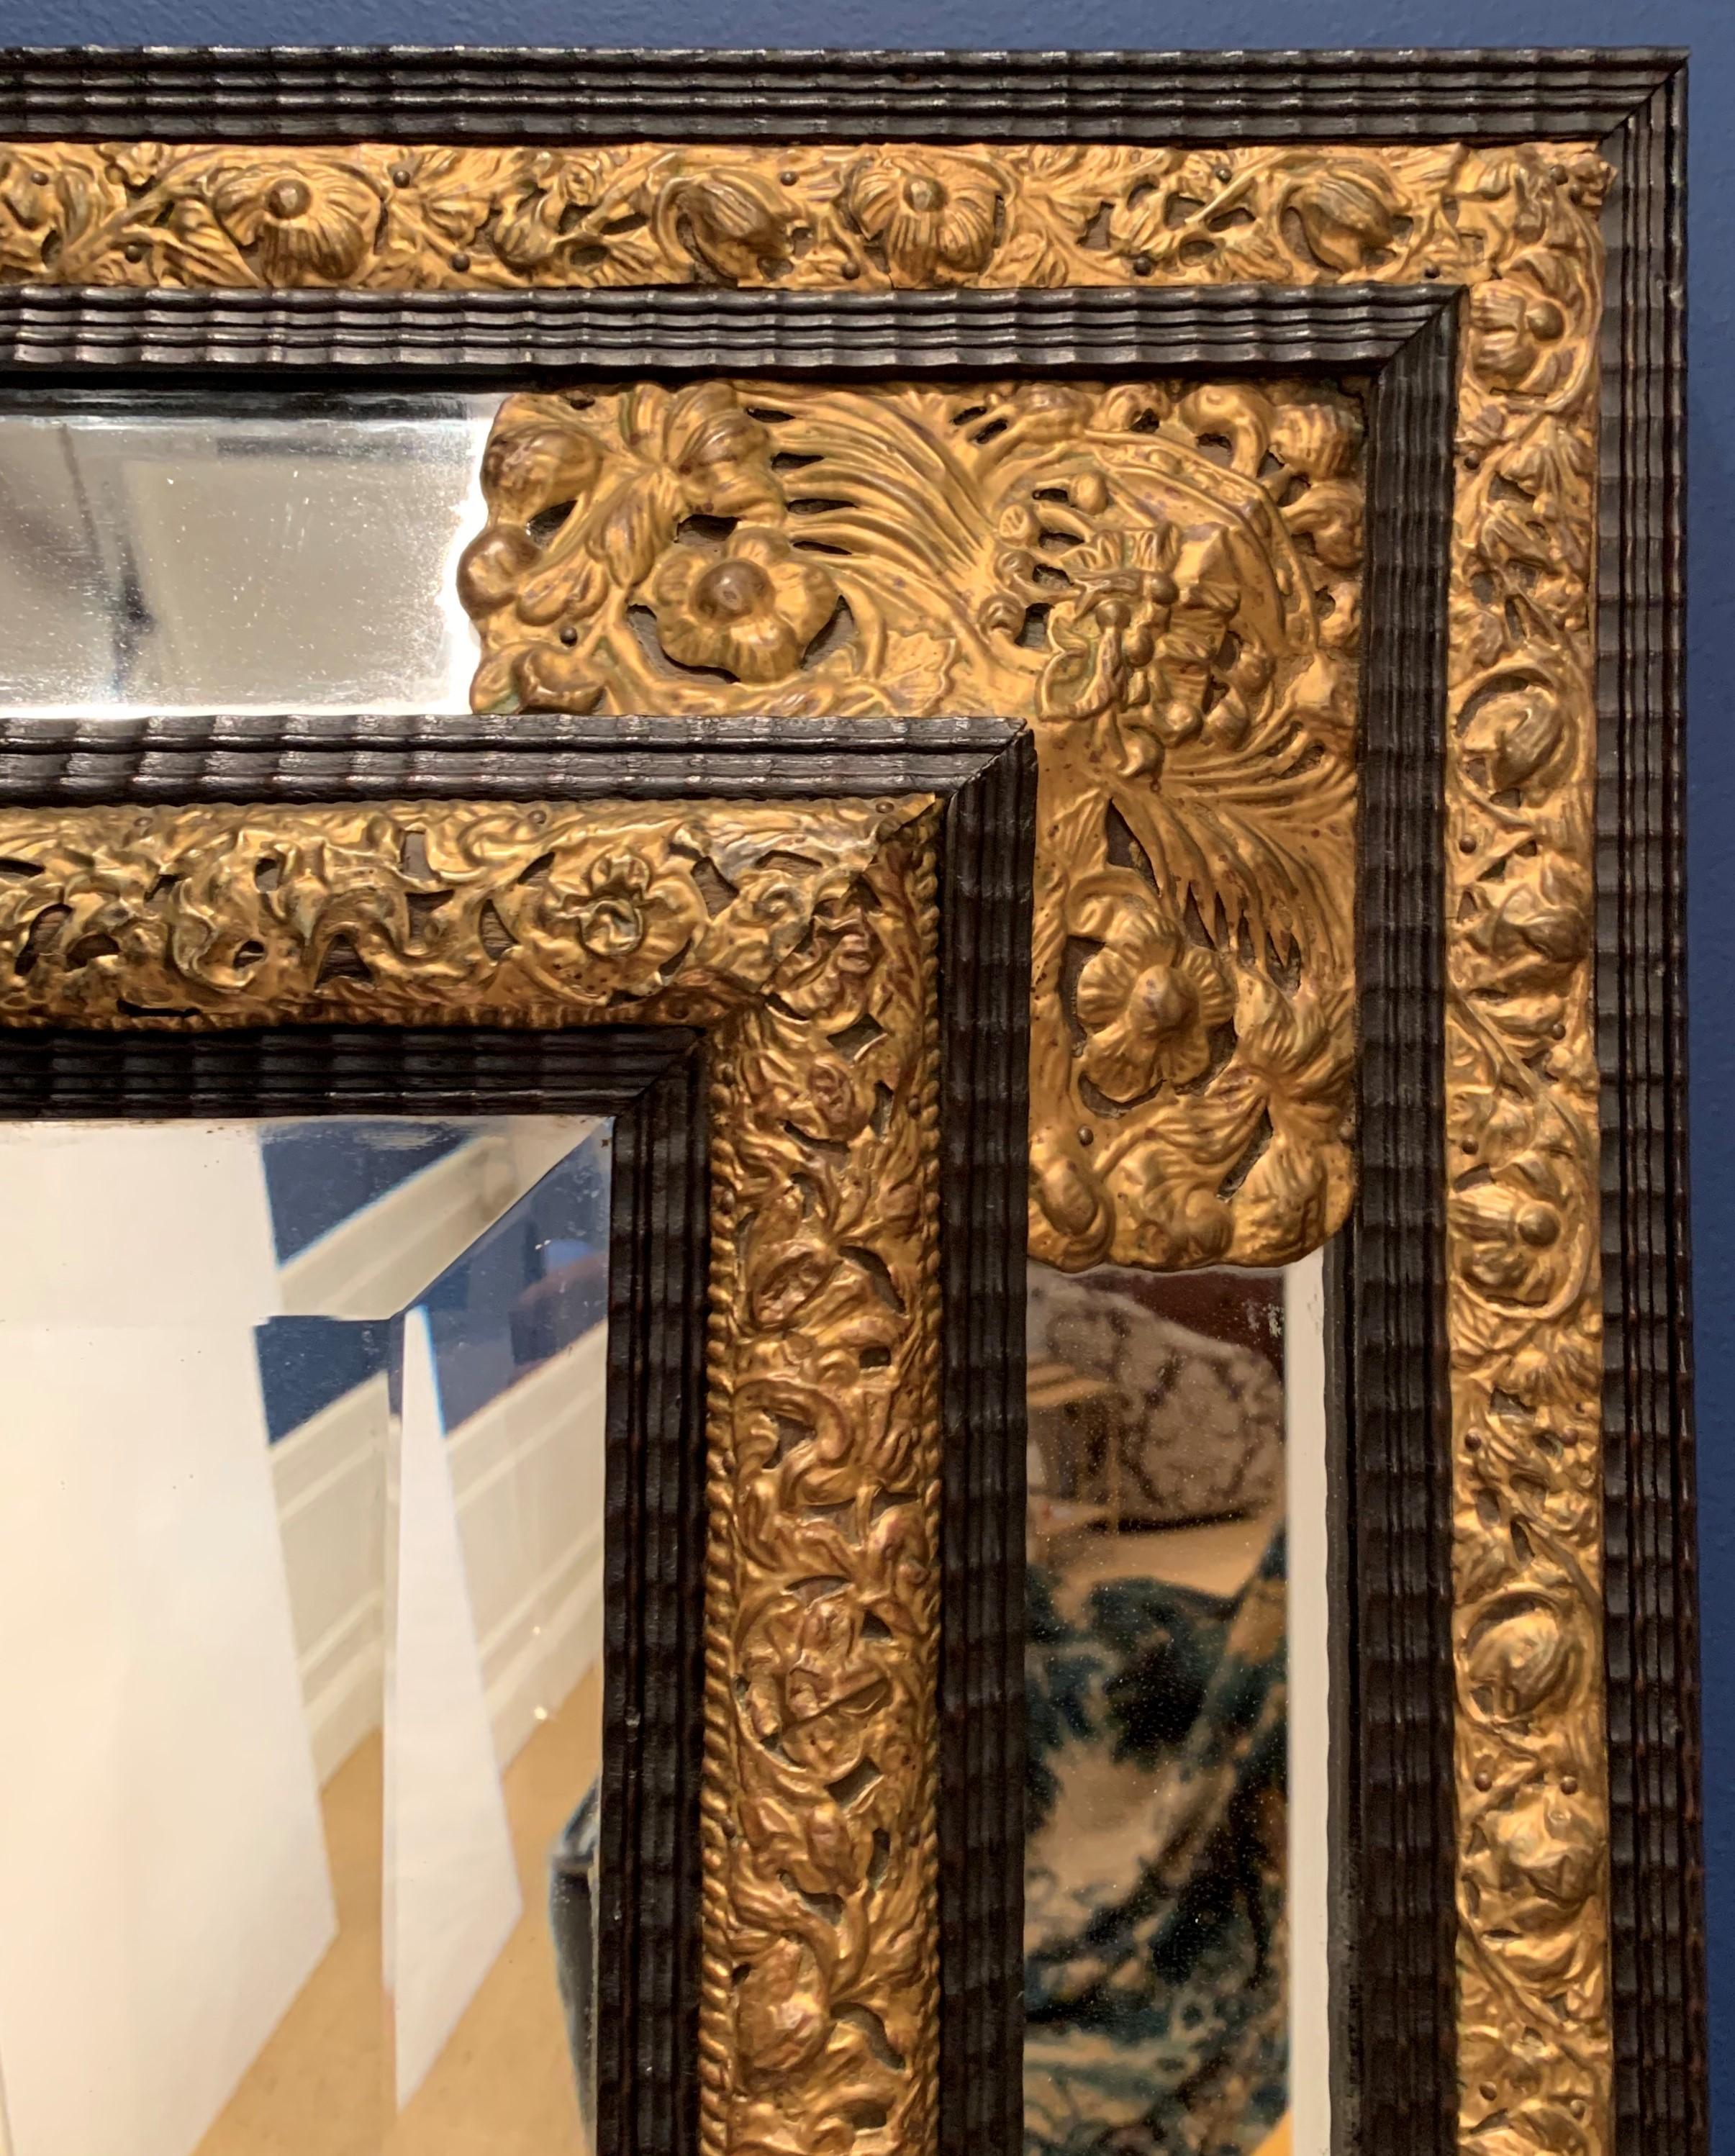 This 17th century Baroque mirror is a high example of Dutch craftsmanship. The mirror is beveled, the wood is ebonized, and the gold foliage is made of brass 